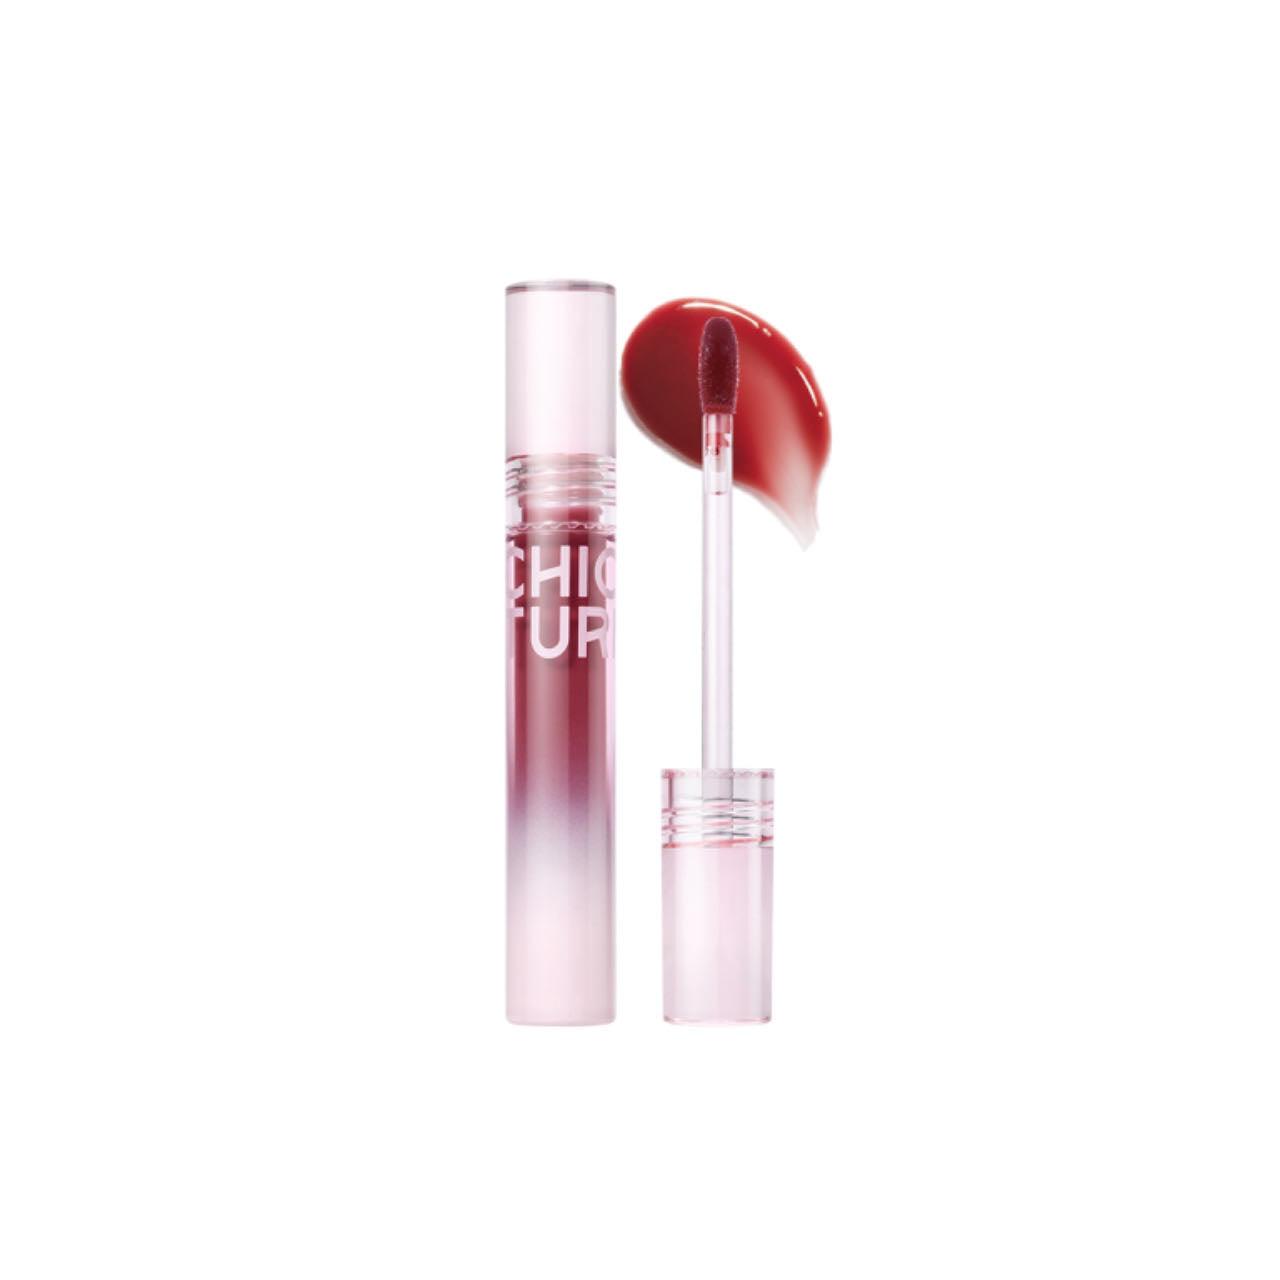 Chioture Shine Lip Gloss COT062 - Chic Decent